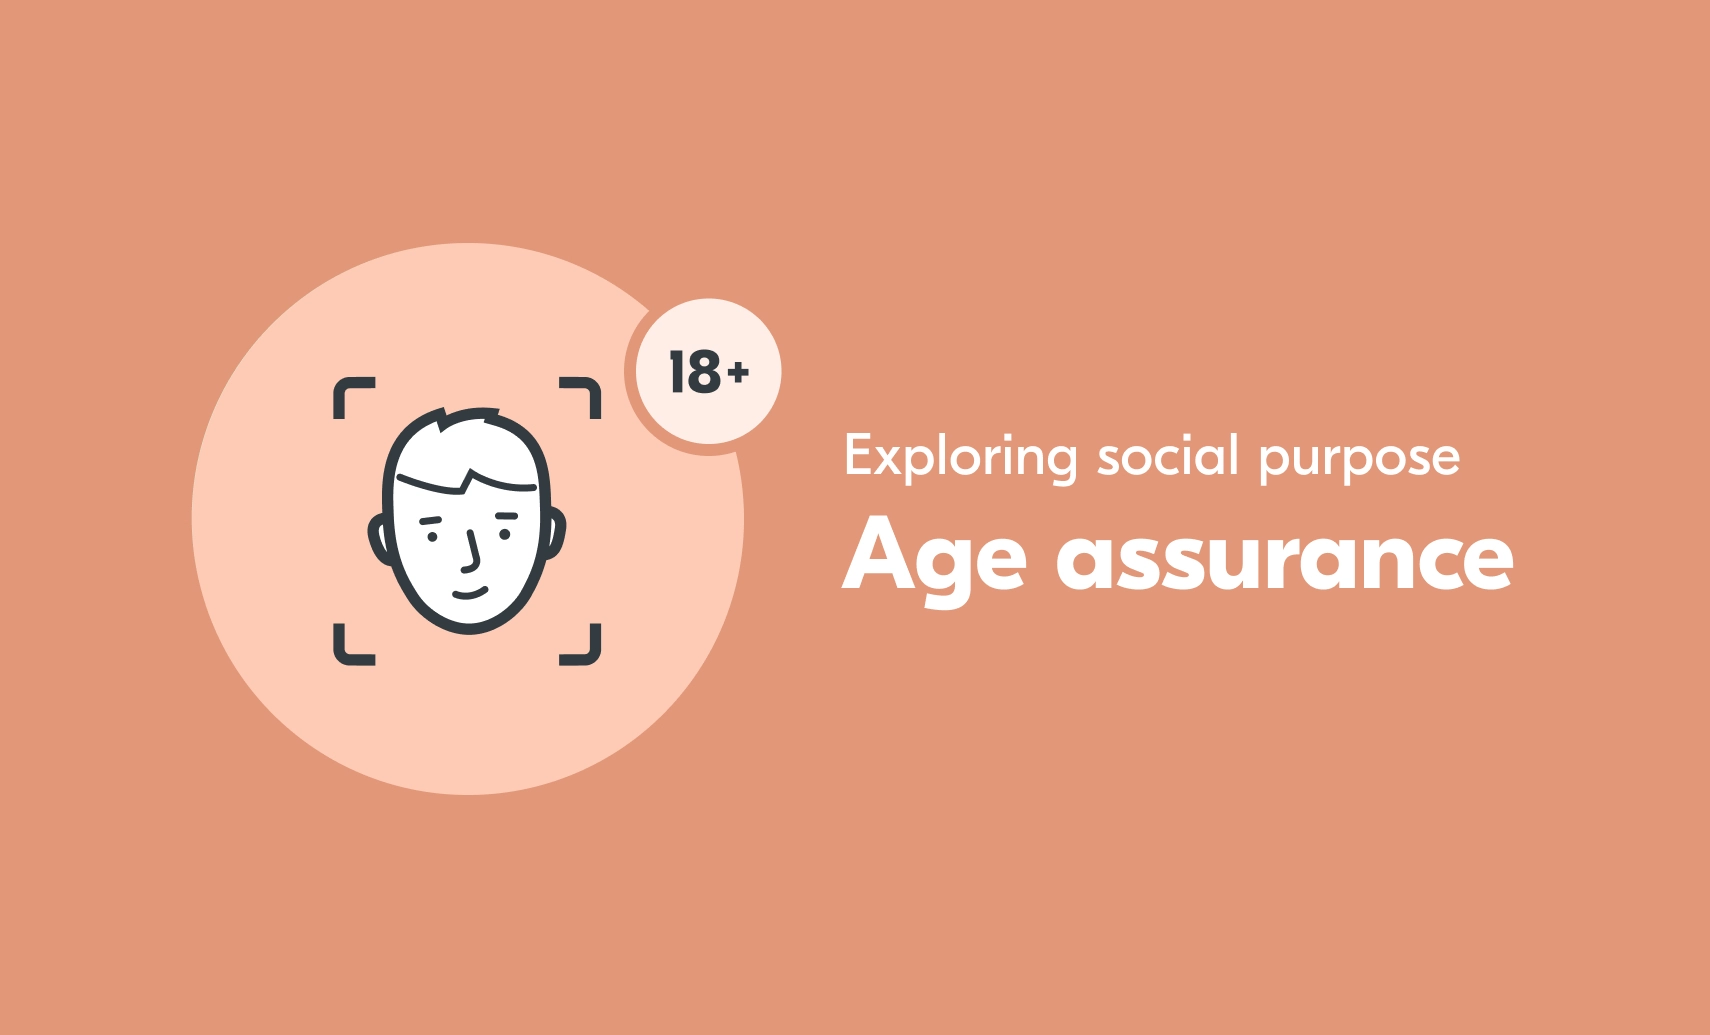 An illustration of a face being marked as "over 18". The accompanying text says "Exploring social purpose: Age assurance".